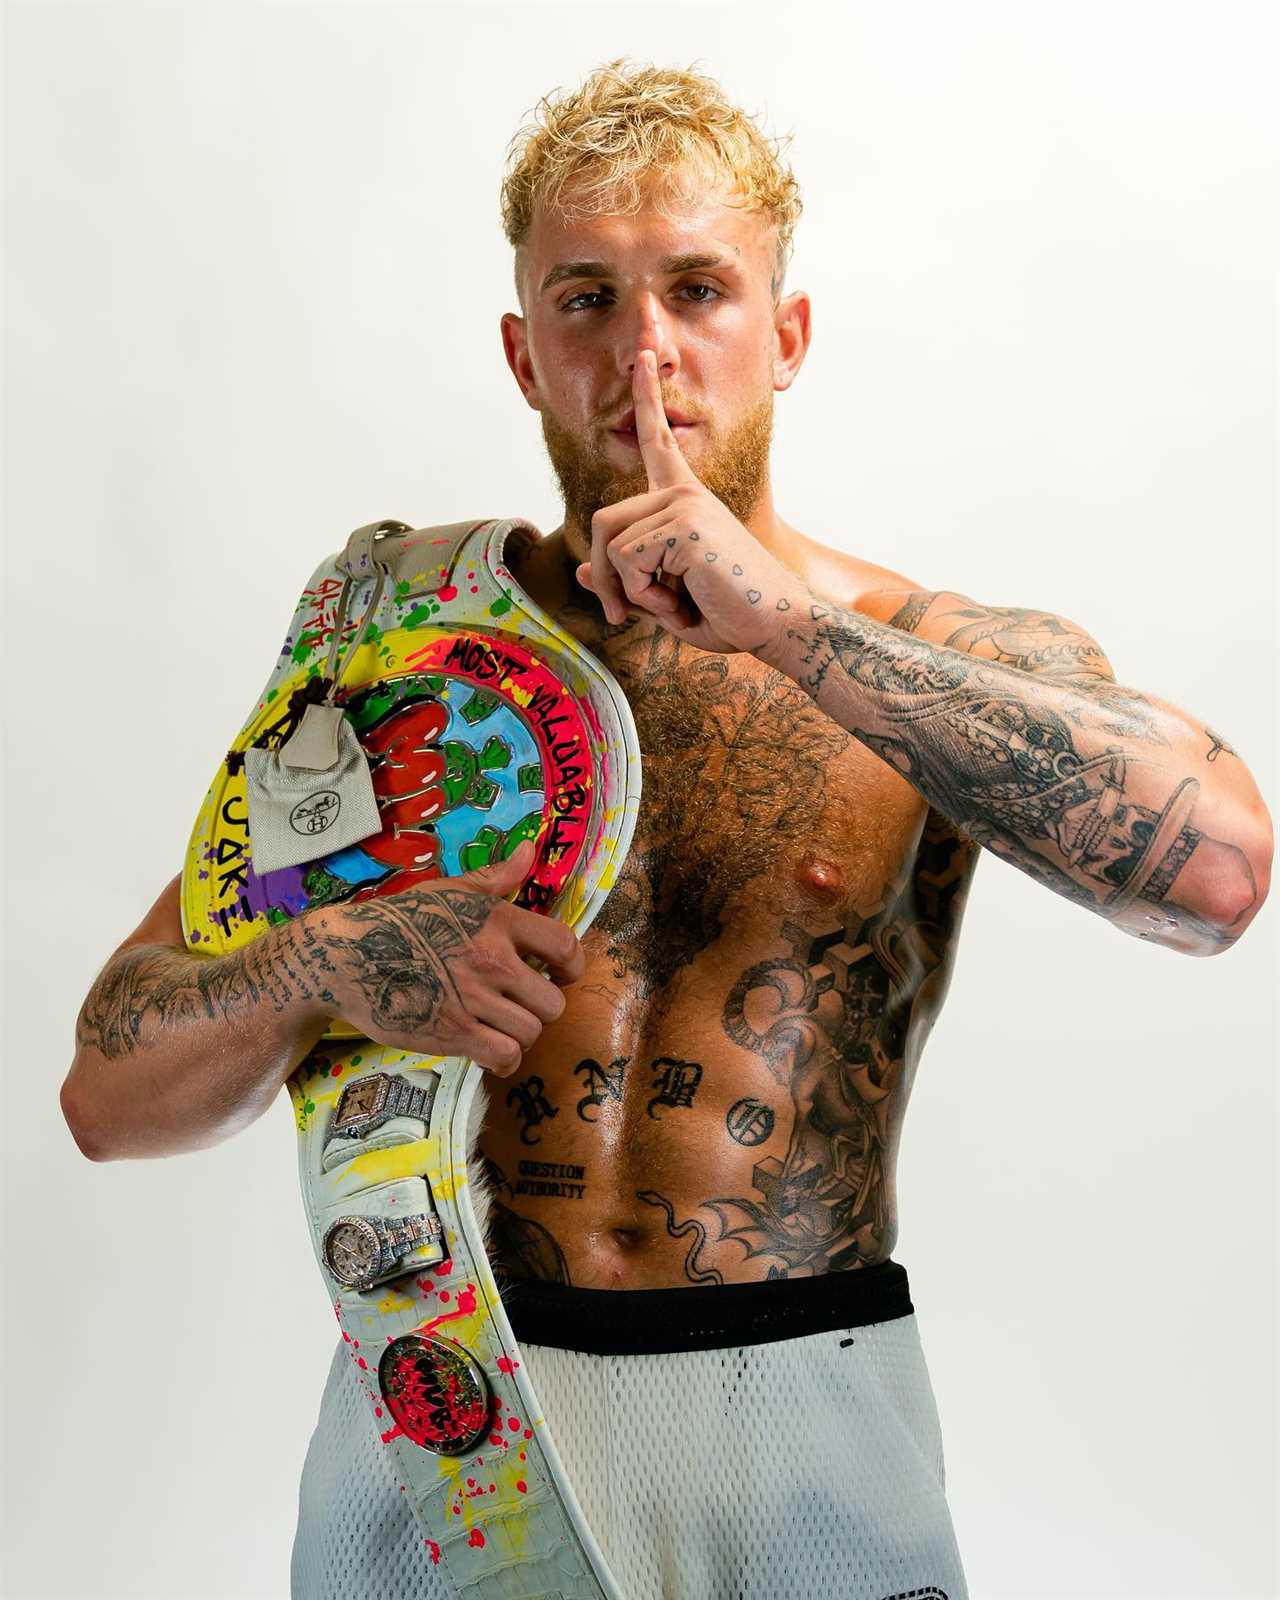 Jake Paul CONFIRMS an interest in fighting Andrew Tate, and vows to f*** up controversial ex-kickboxing champion